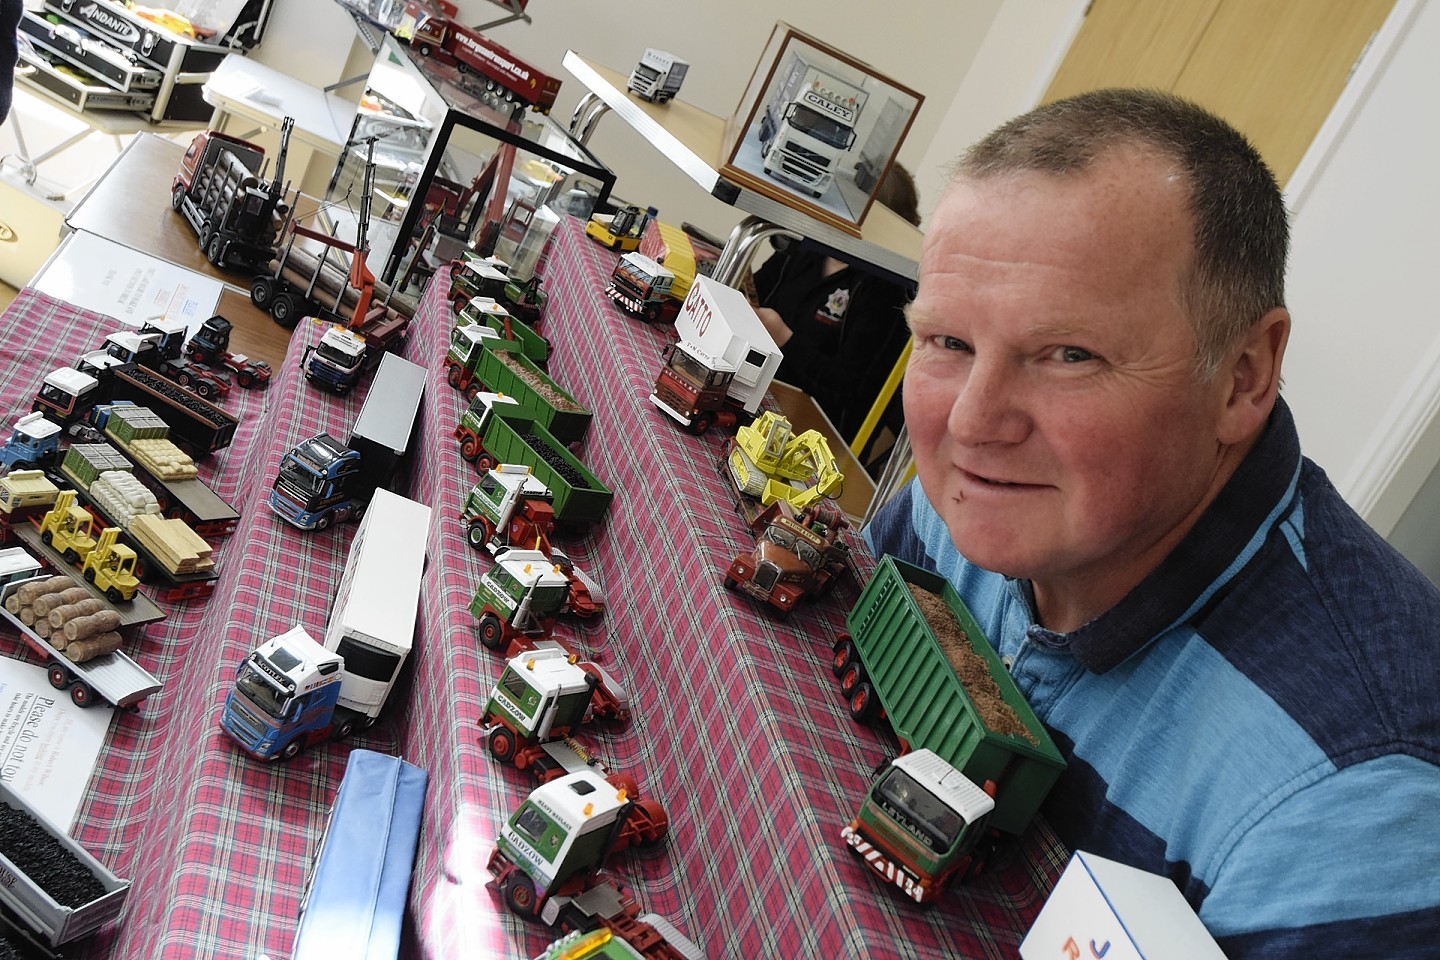 Robert Wilson with his display at last year's event.